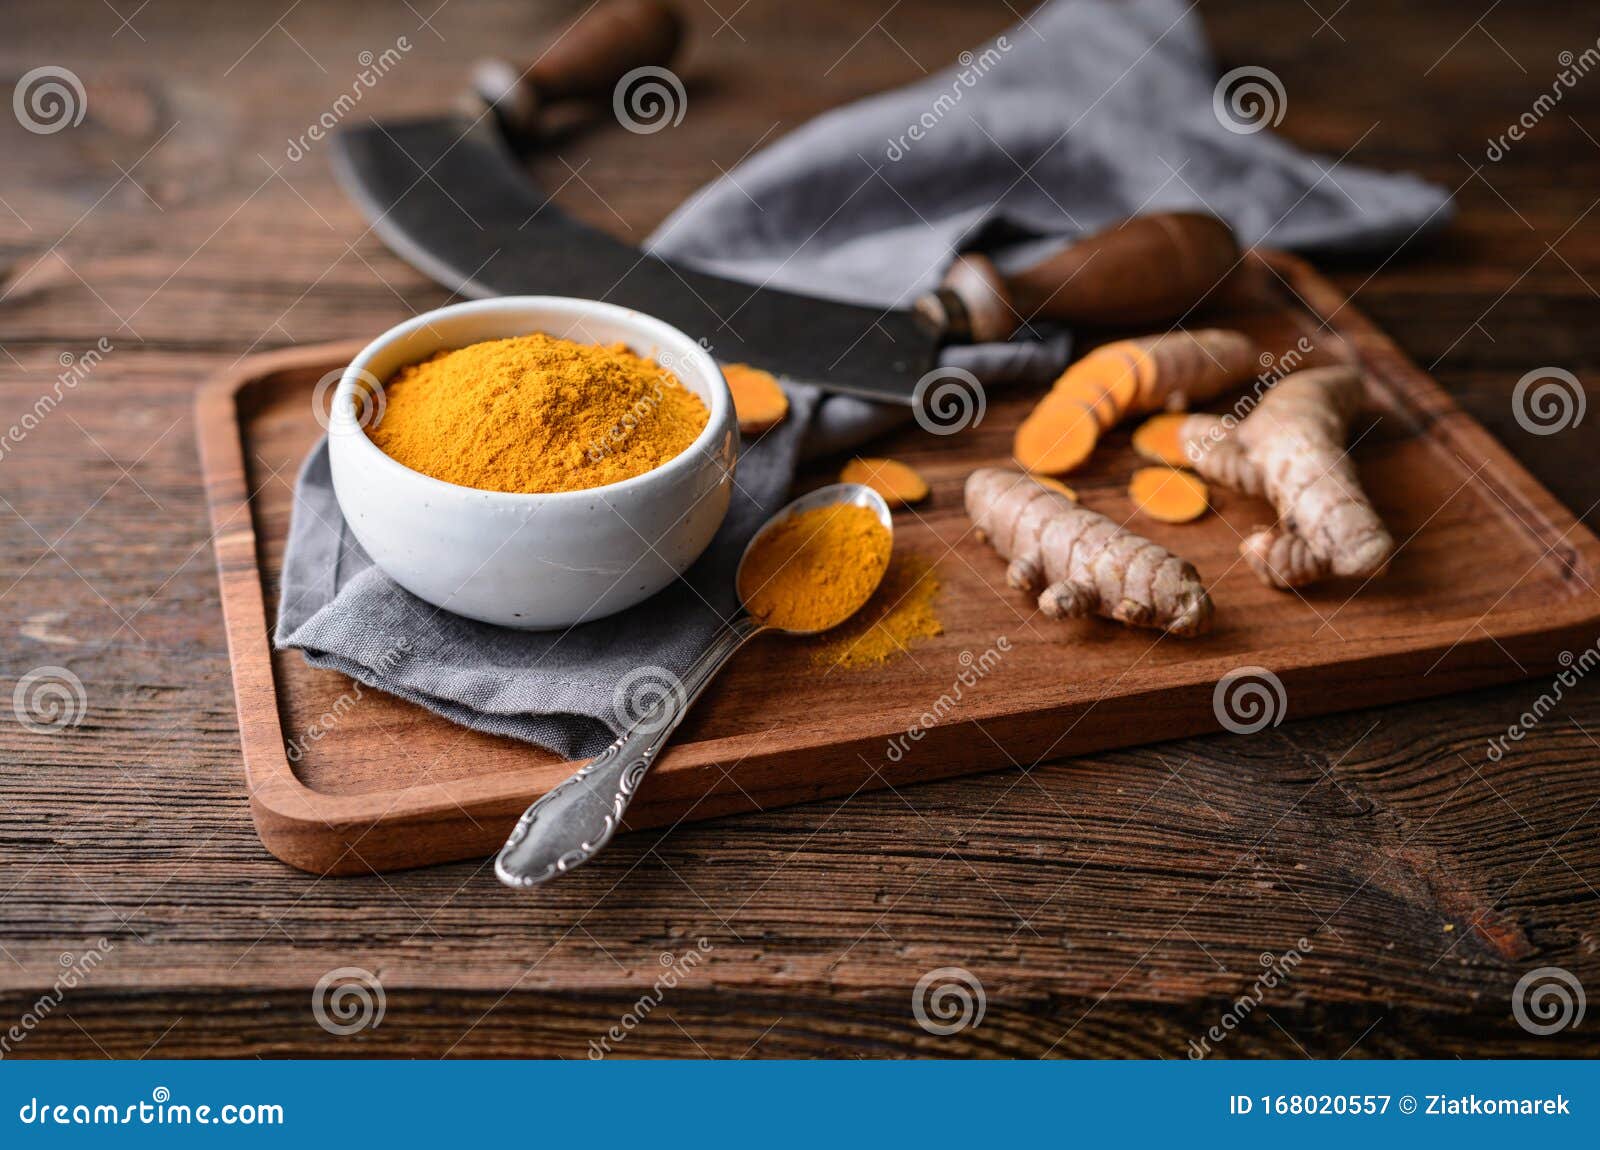 anti-inflammatory food ingredient, turmeric powder in a ceramic bowl and fresh root on wooden background